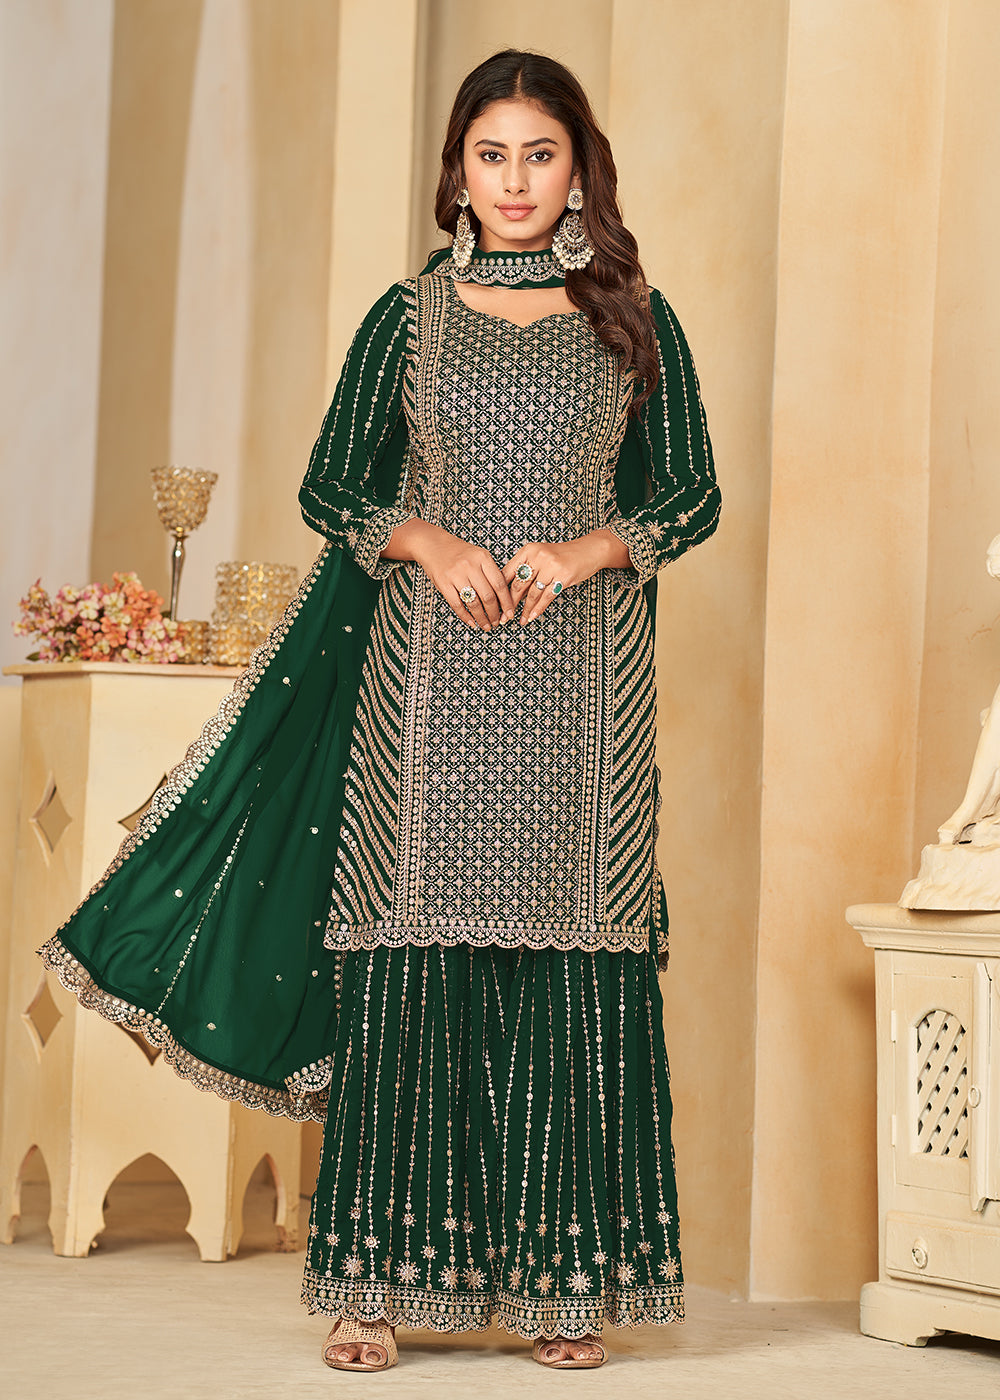 Buy Now Mesmeric Green Faux Georgette Palazzo Suit with Embroidery Online in USA, UK, Canada, Germany, Australia & Worldwide at Empress Clothing. 